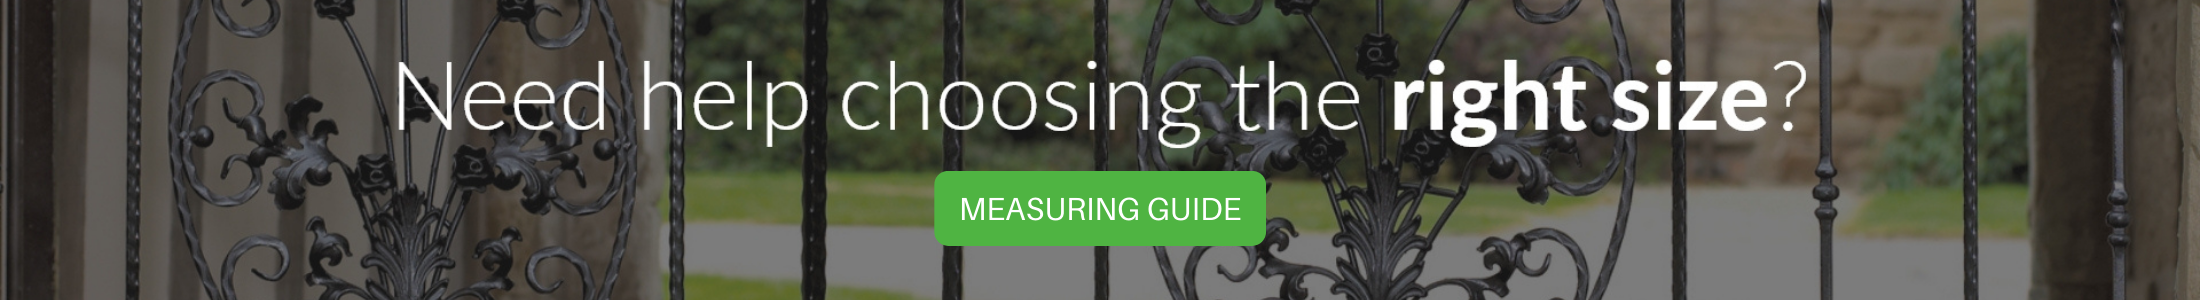 View the measuring guide here